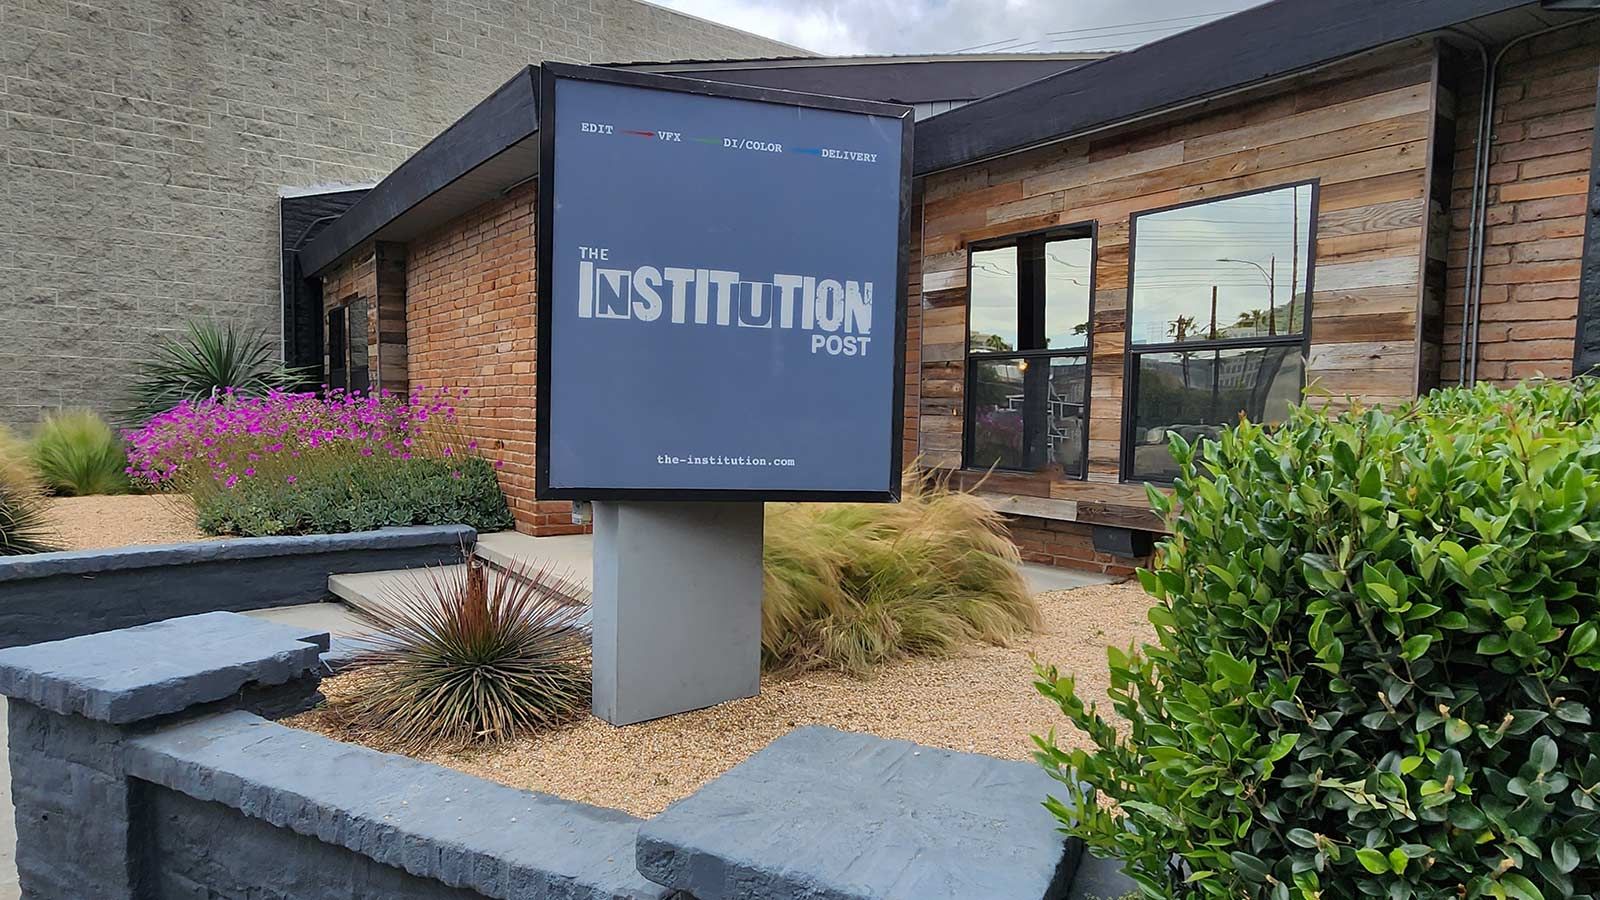 The Institution Post outdoor sign repair for branding